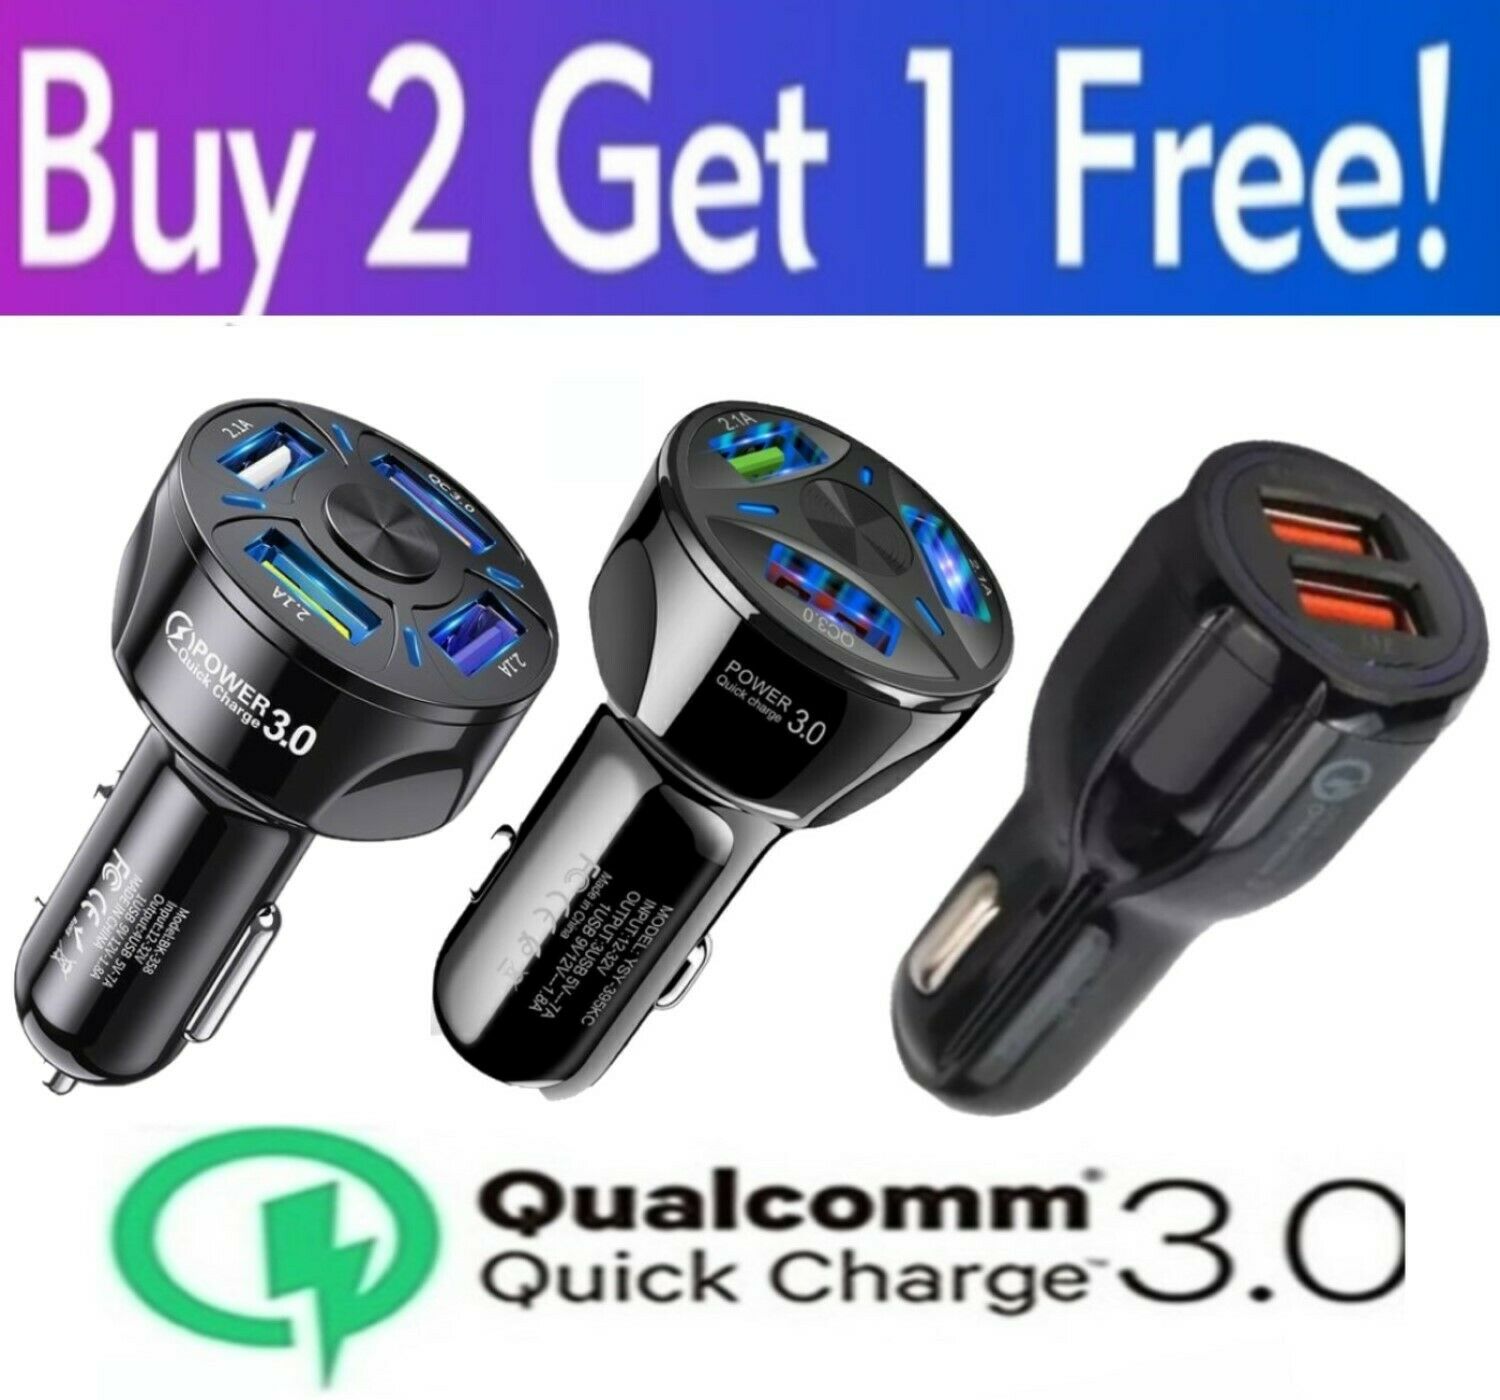 2 3 4 Port Usb Fast Car Charger Adapter For Iphone Samsung Android Cell Phone Lg